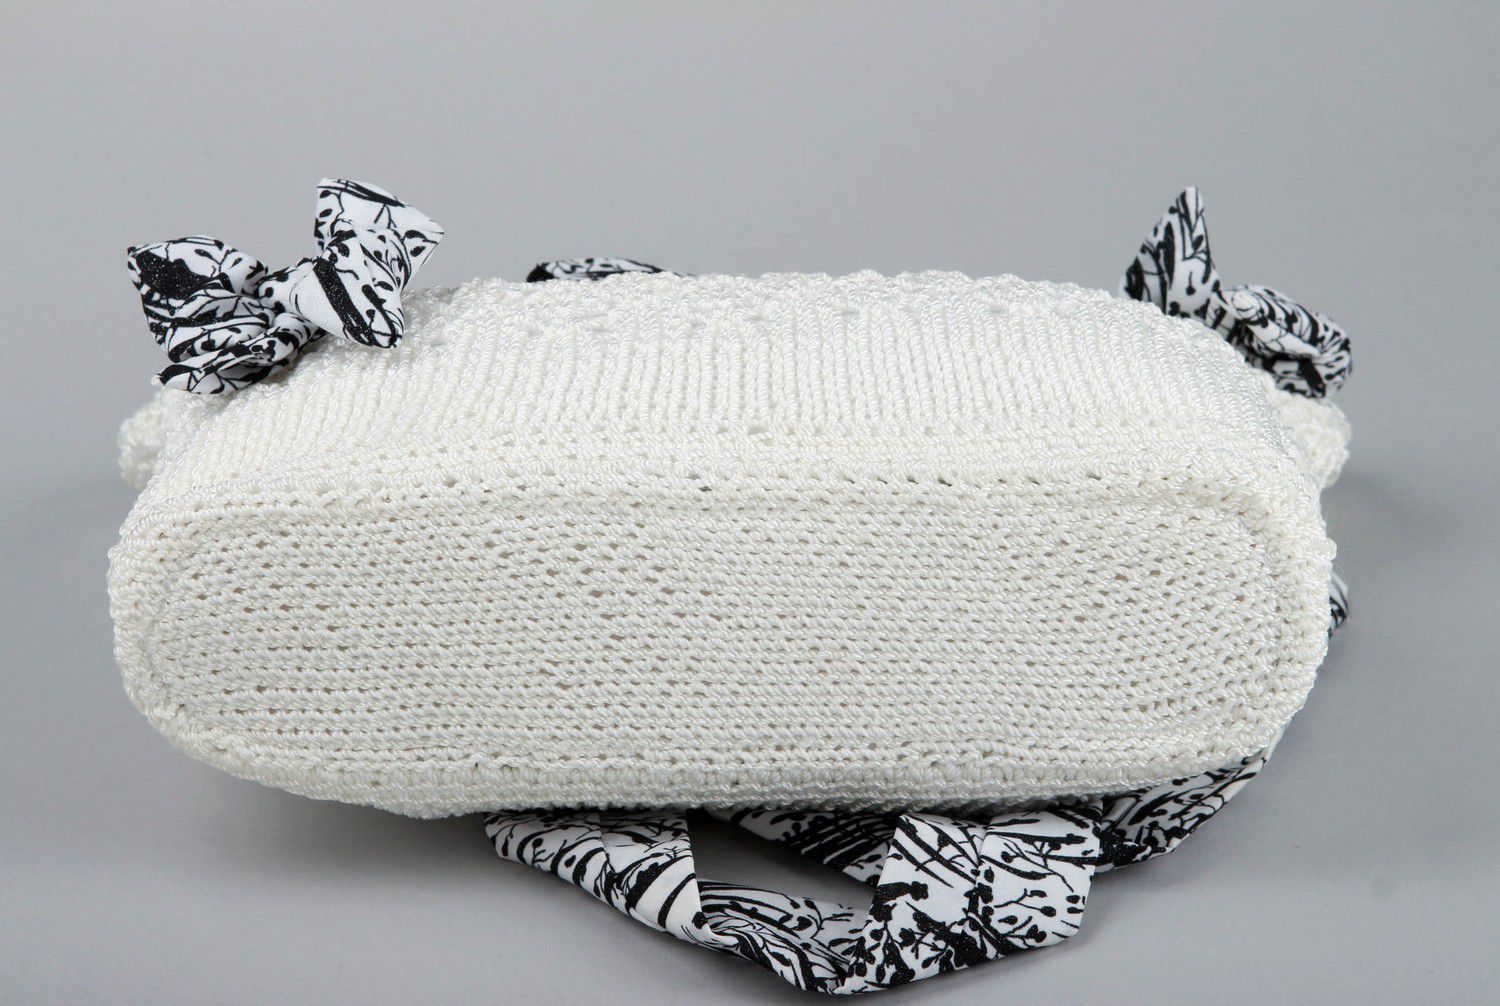 Knitted white bag photo 4